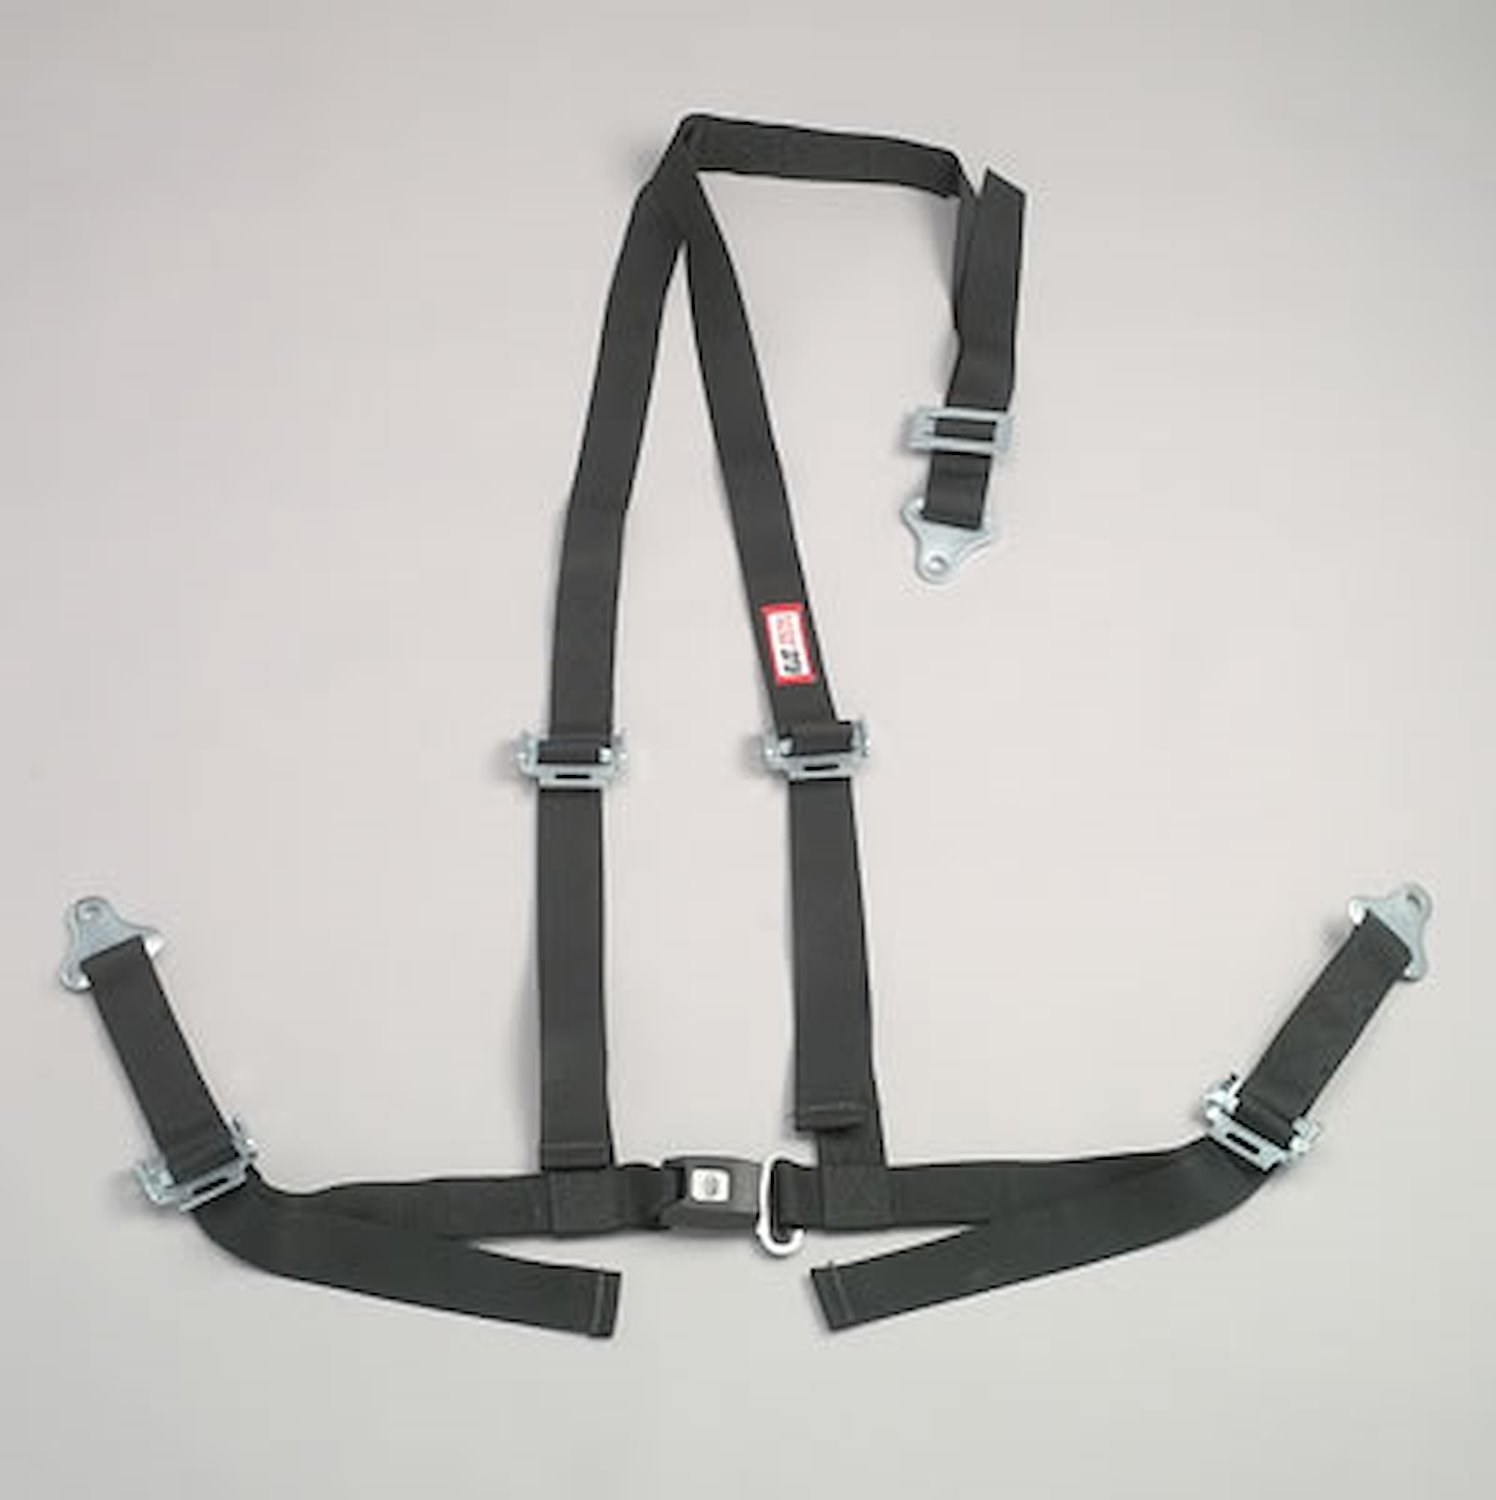 NON-SFI B&T HARNESS 2 PULL UP Lap Belt 2 S. H. Individual ROLL BAR Mount ALL WRAP ENDS w/STERNUM STRAP BLACK